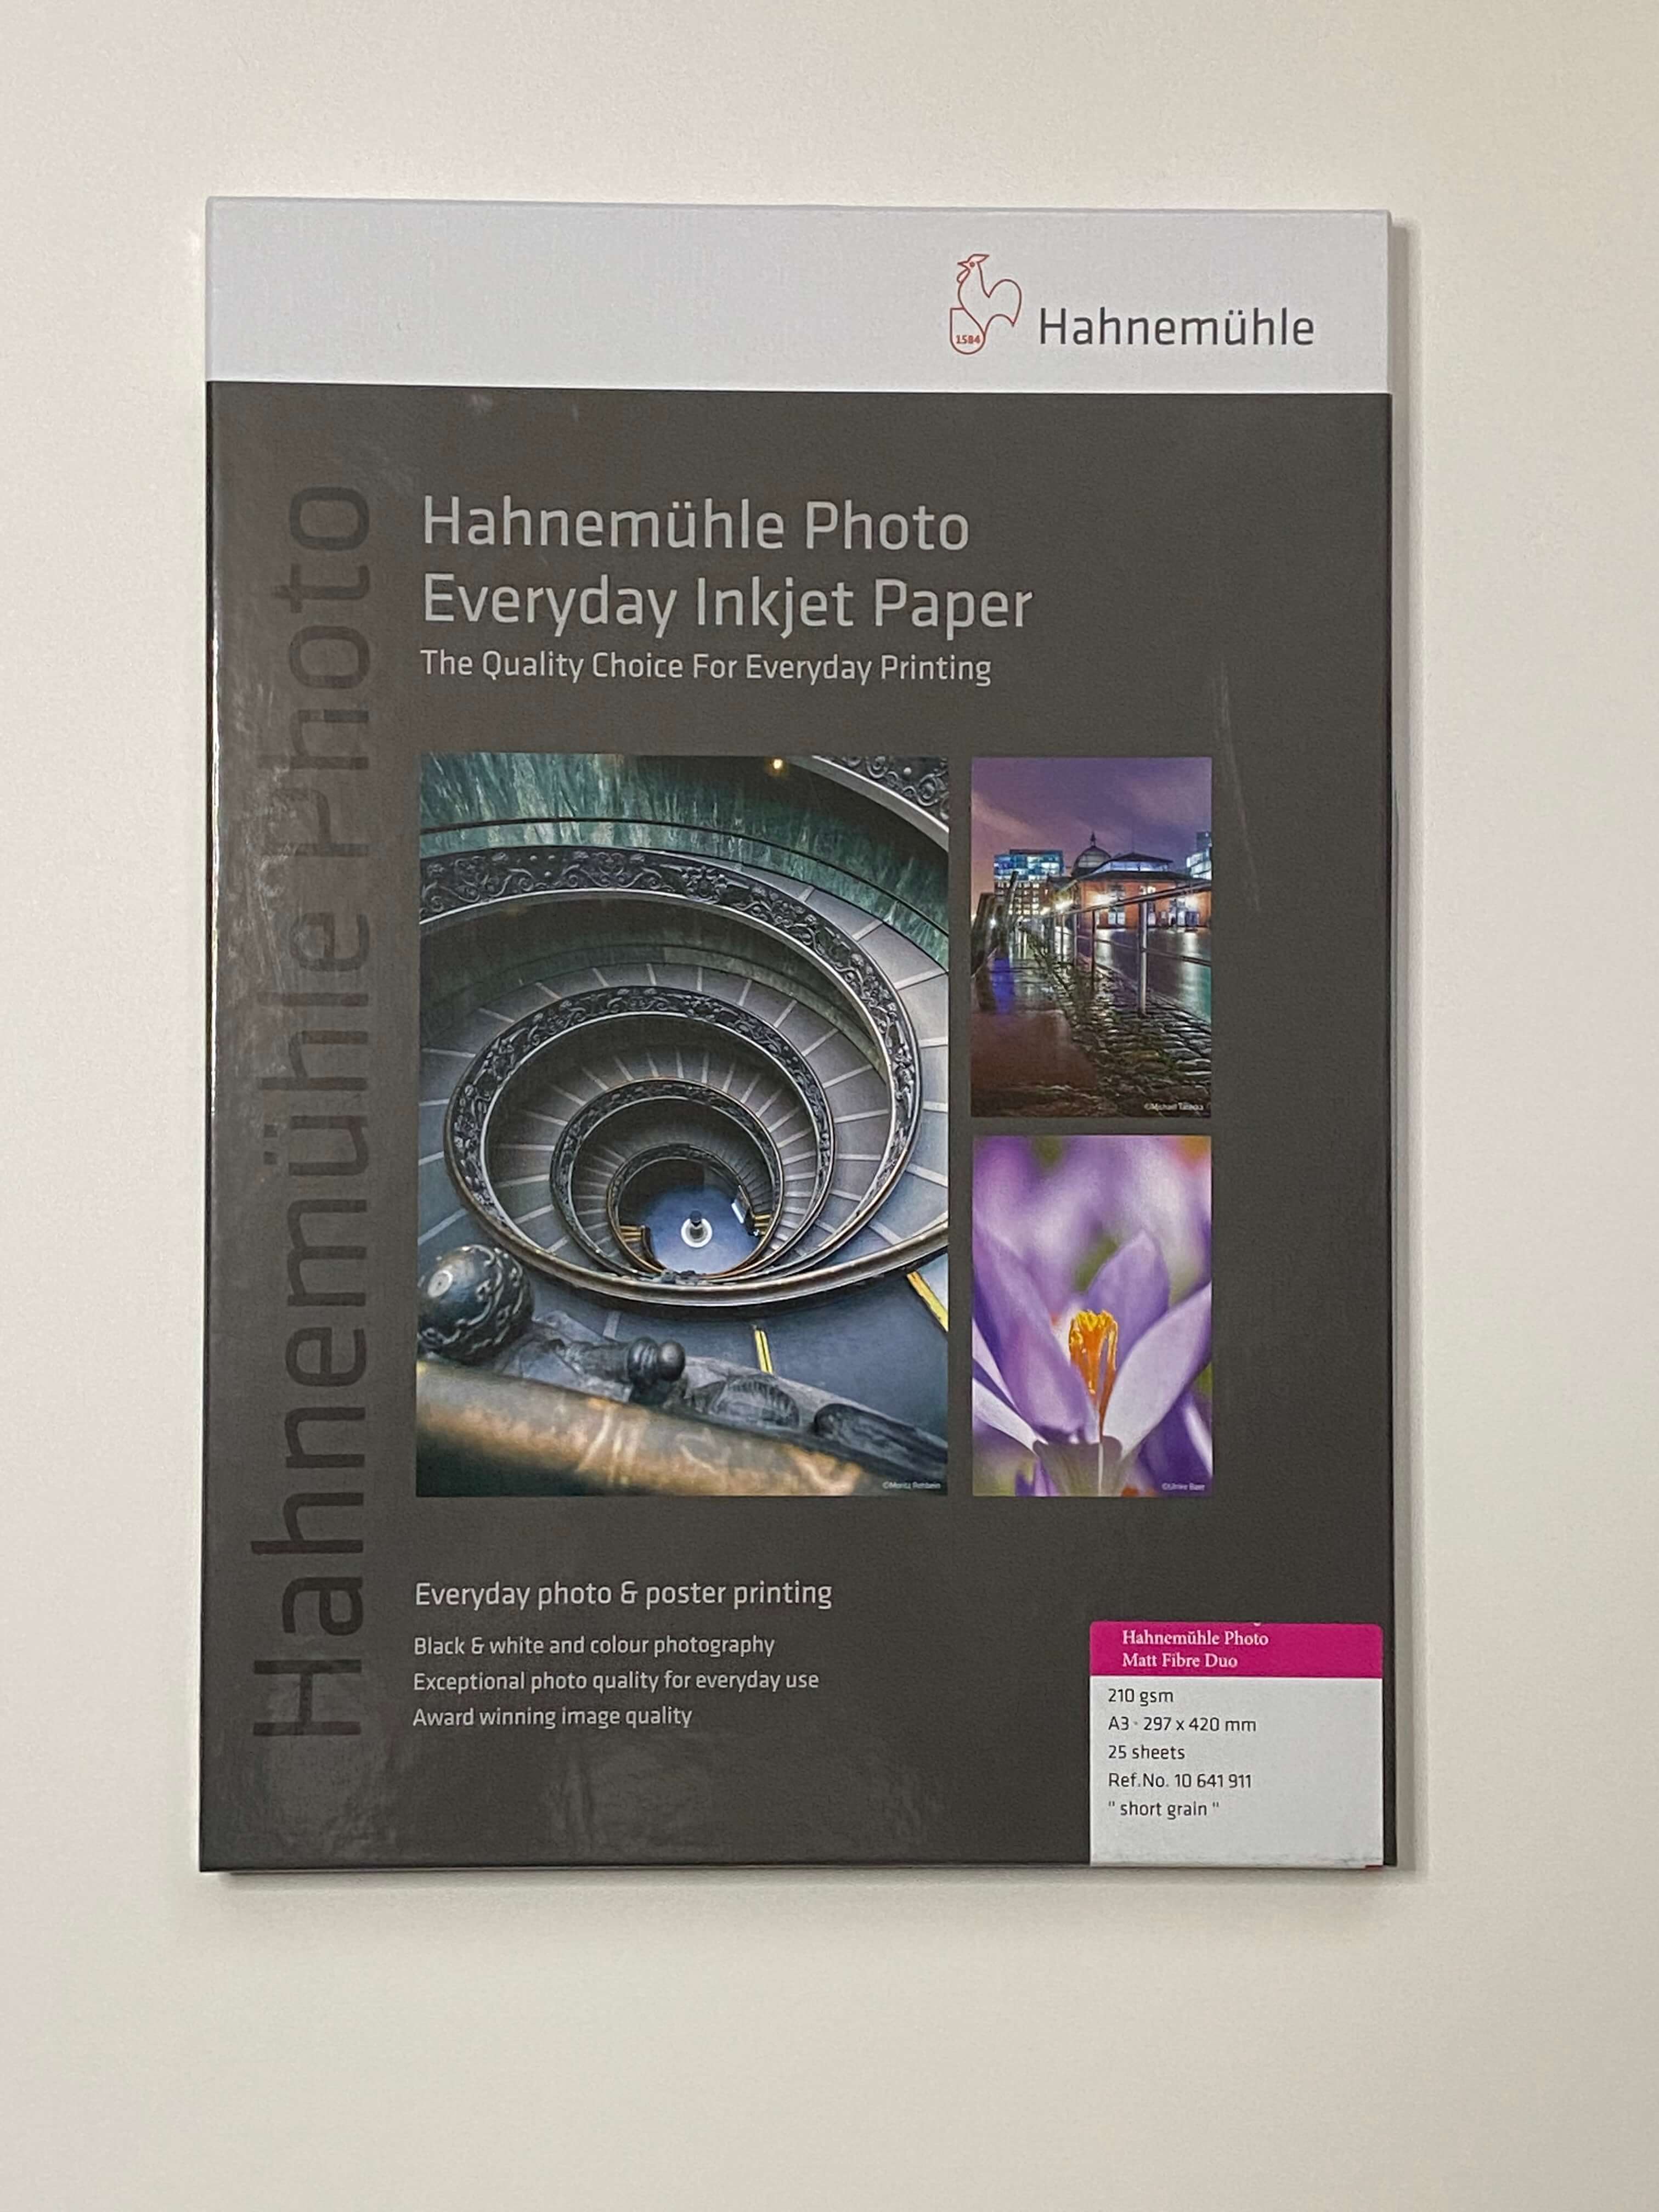 Hahnemuhle A4 Inkjet Paper 210g